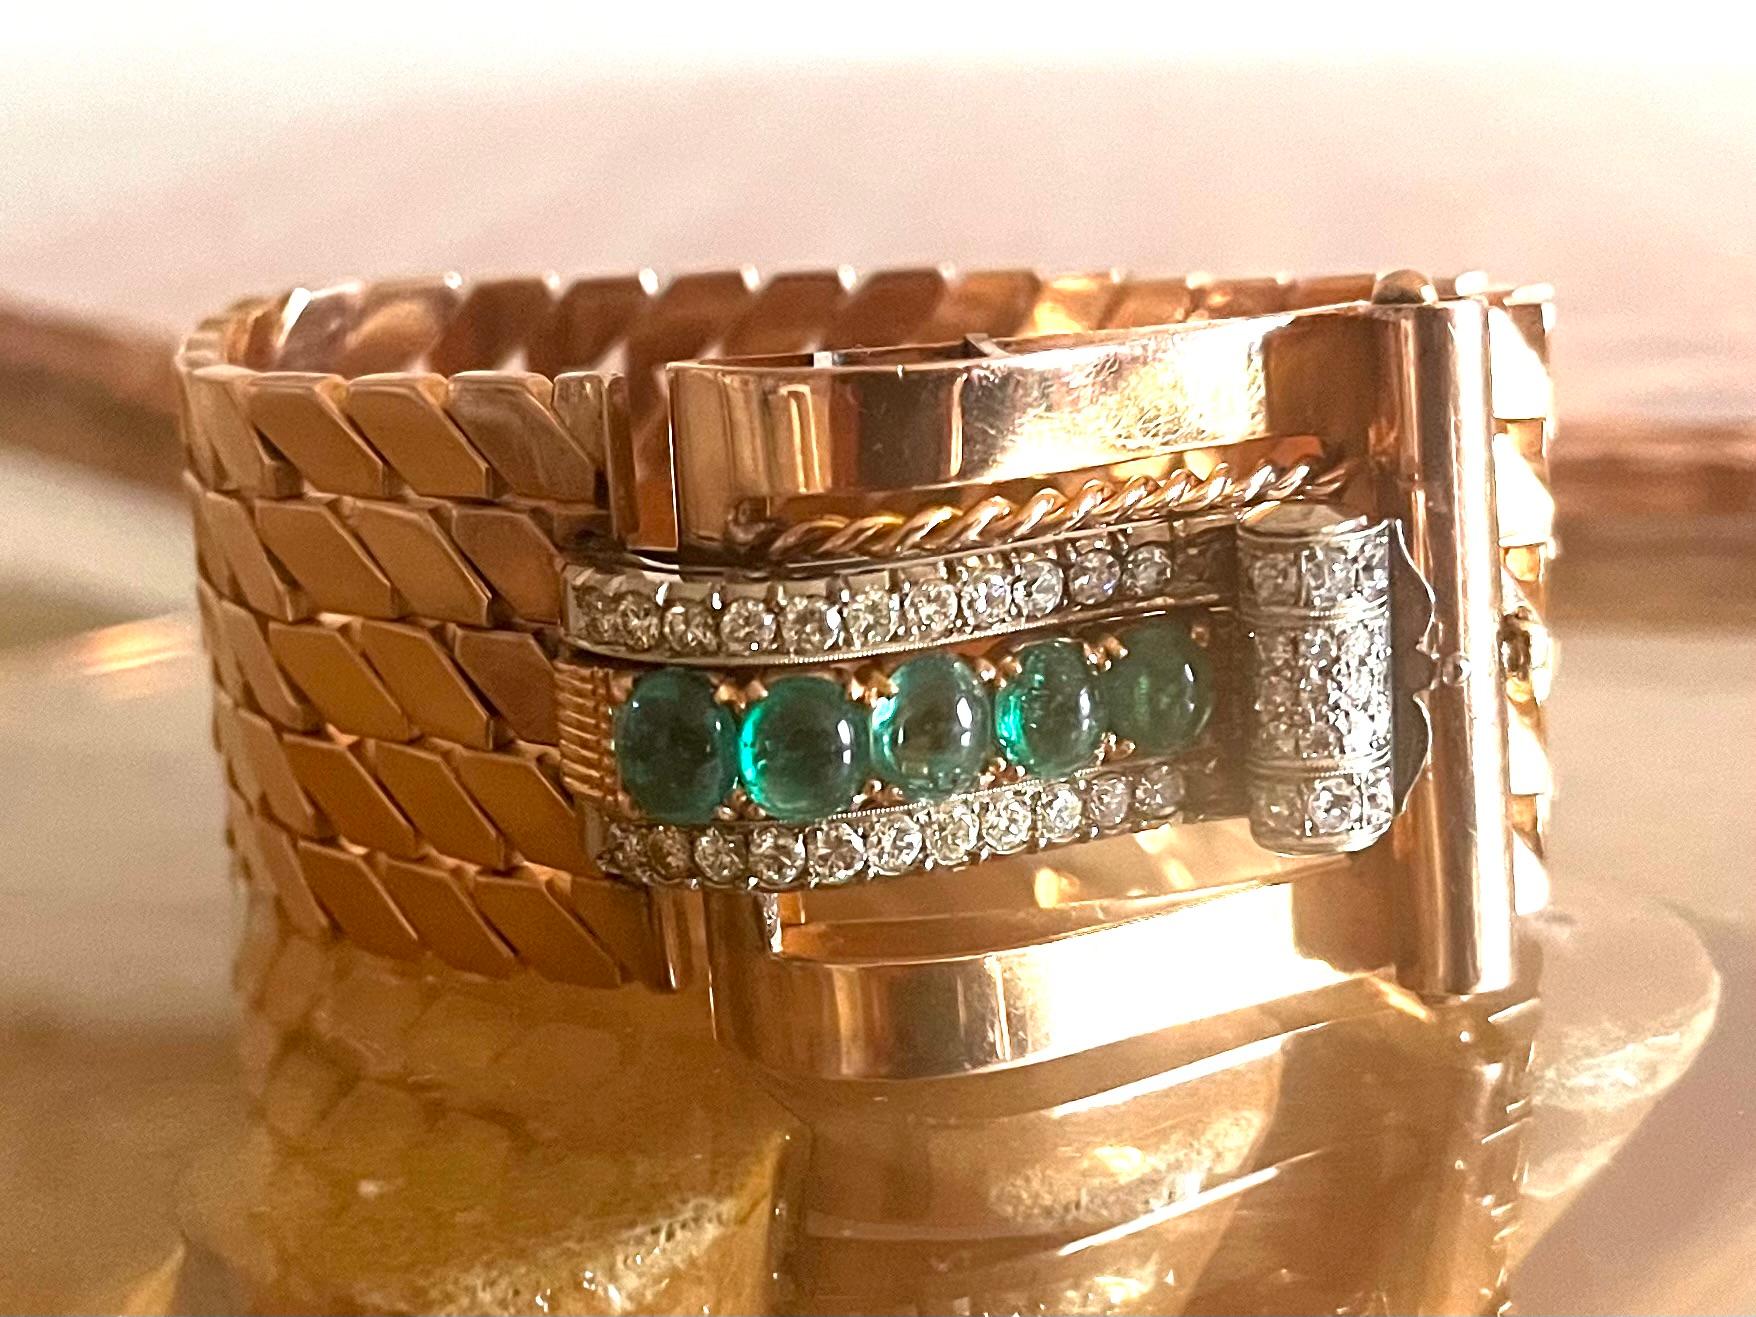 This sublime Tank Retro Bracelet in 18K rose gold features geometric pattern ornamented with 5 cabochons of emeralds framed by two lines of round diamonds and a clasp made by a swirl of diamonds. Work from the 40s.

Due to the beginning of the